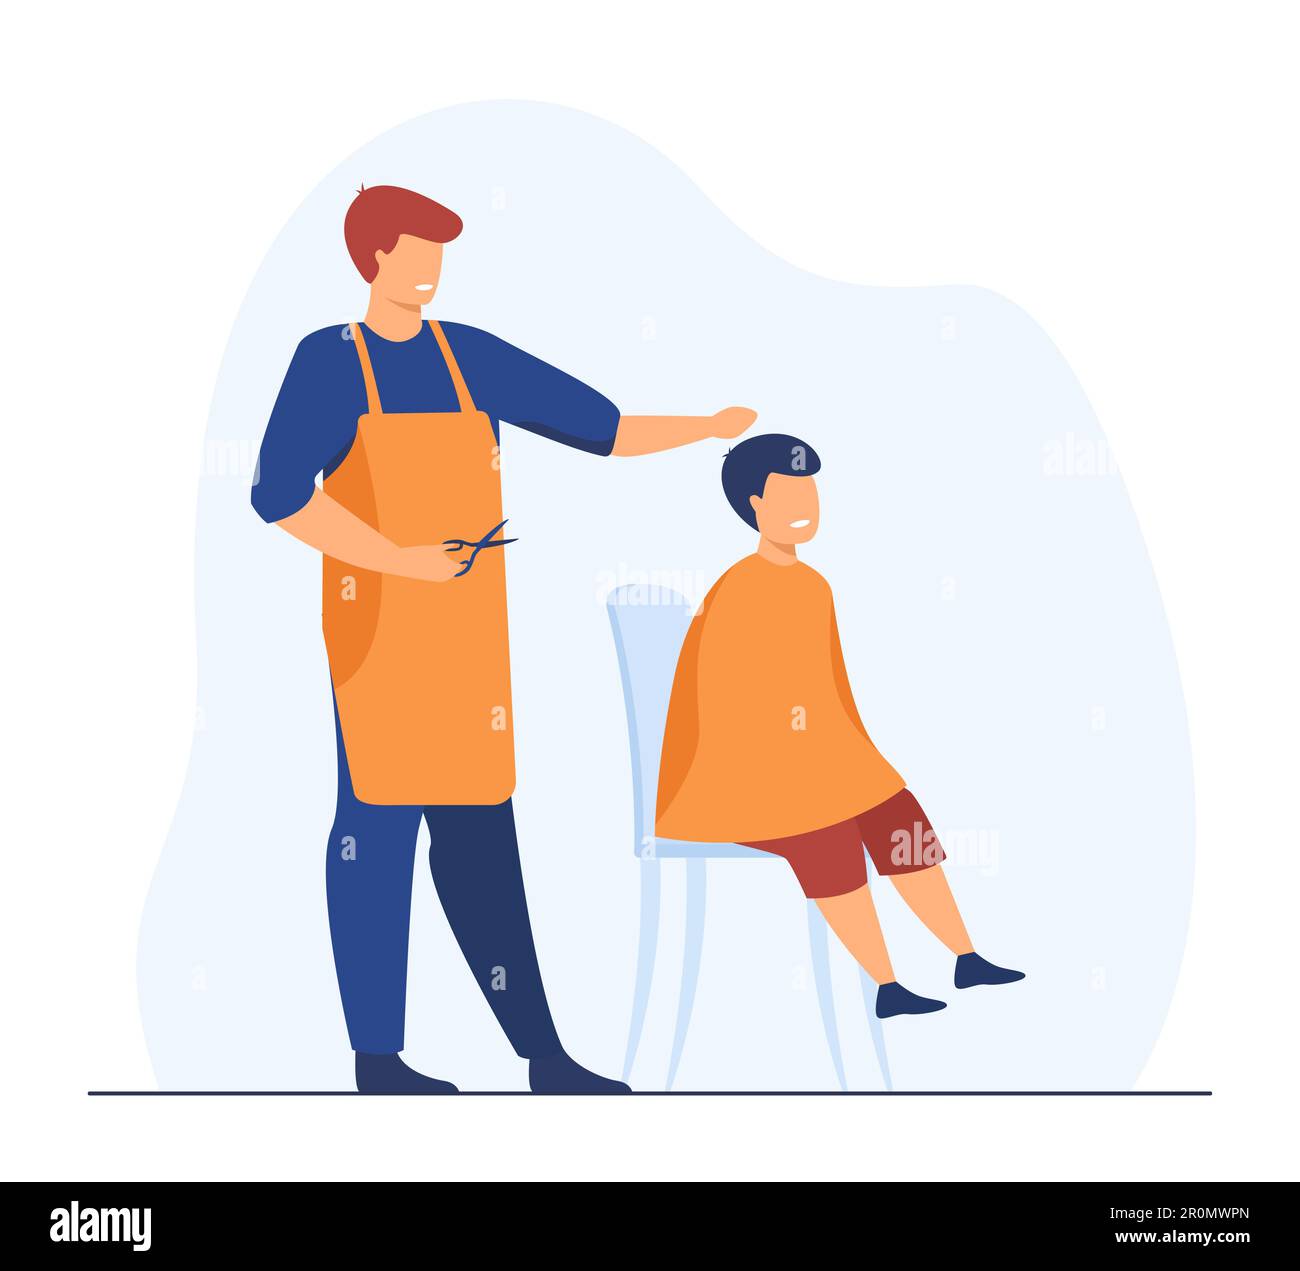 Professional hairdresser cutting hairs of boy Stock Vector